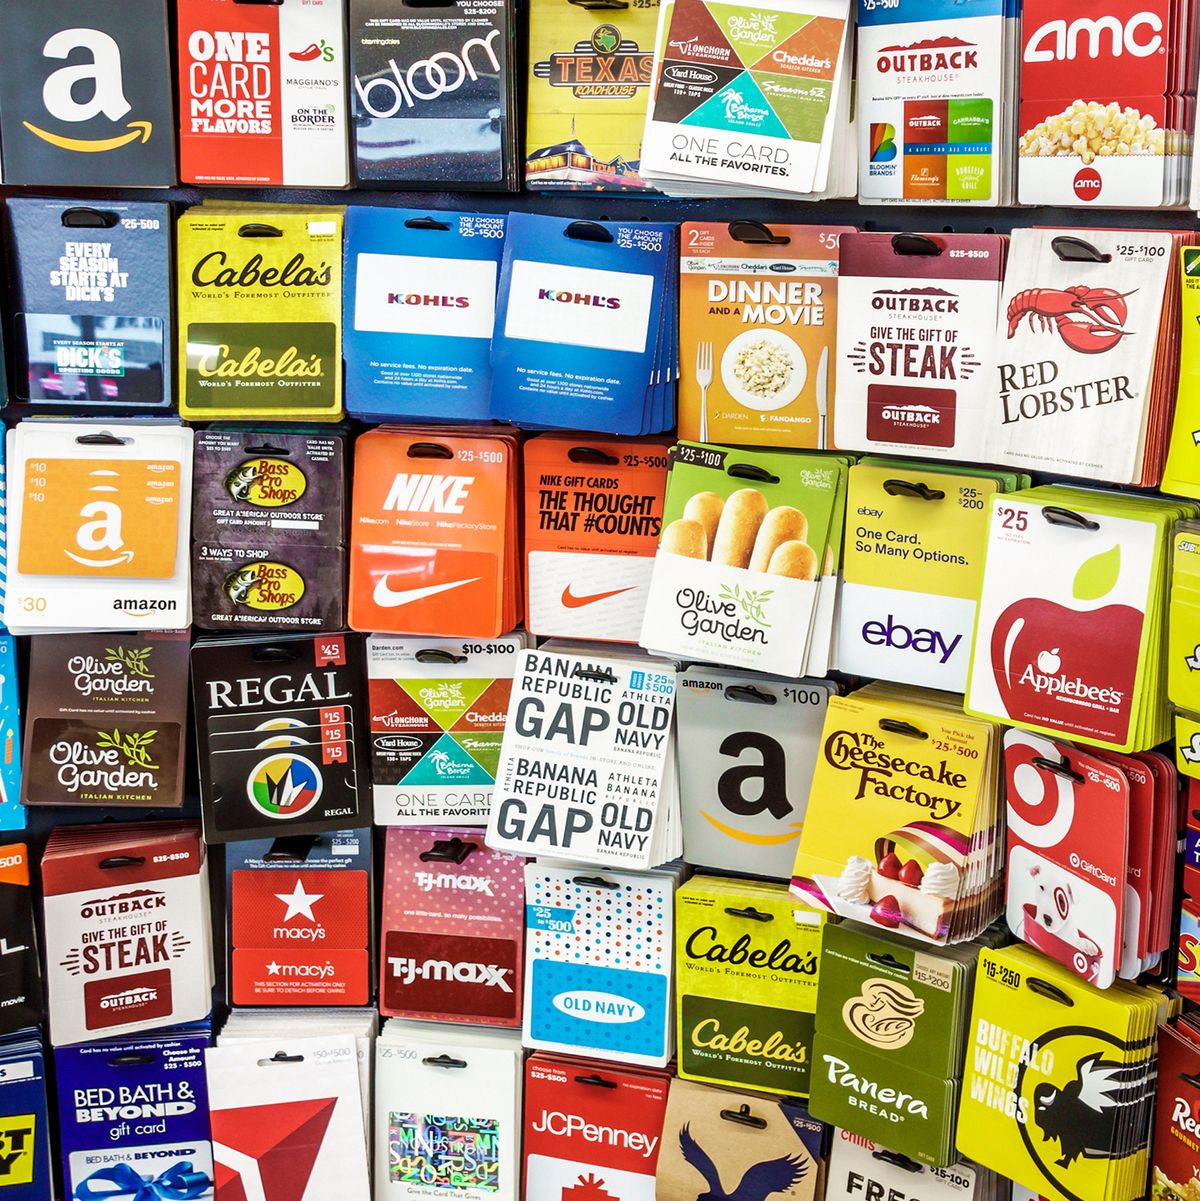 Where to Buy  Gift Cards: In Stores and Online Gift Cards